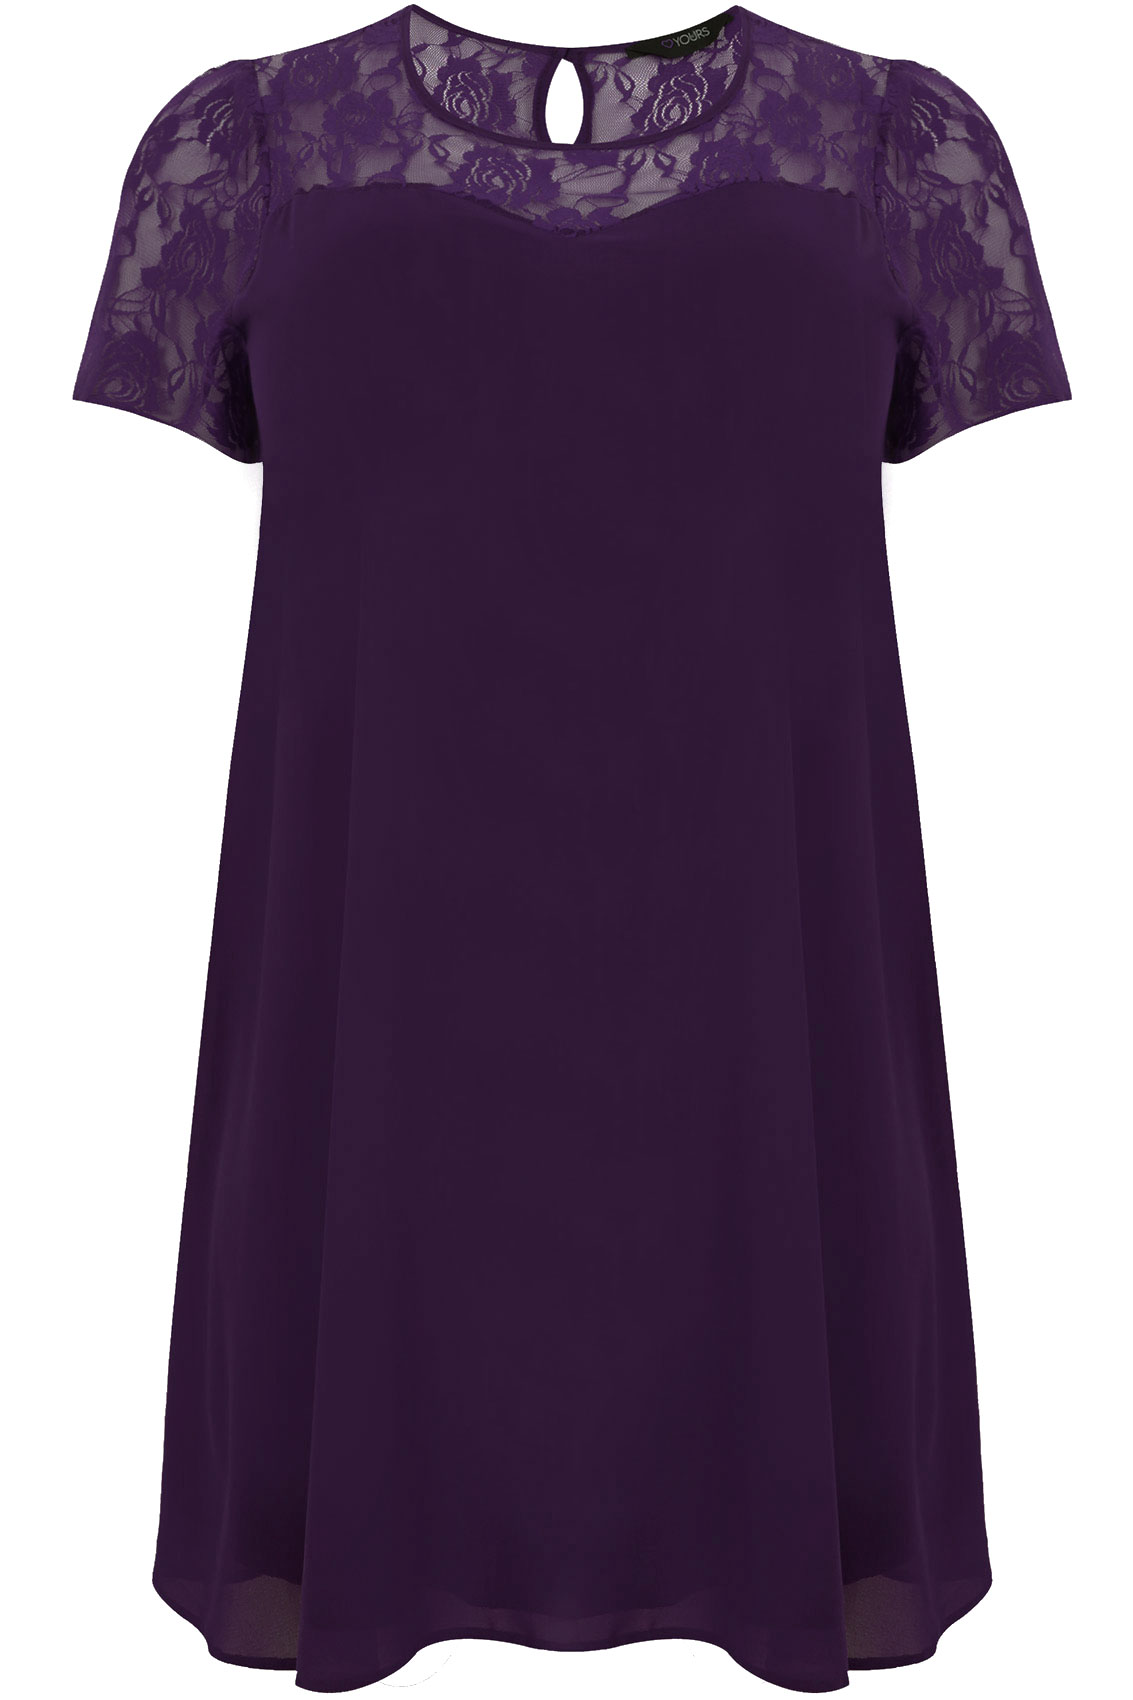 Purple Chiffon Swing Dress With Contrast Sheer Lace Top Panel Plus size ...